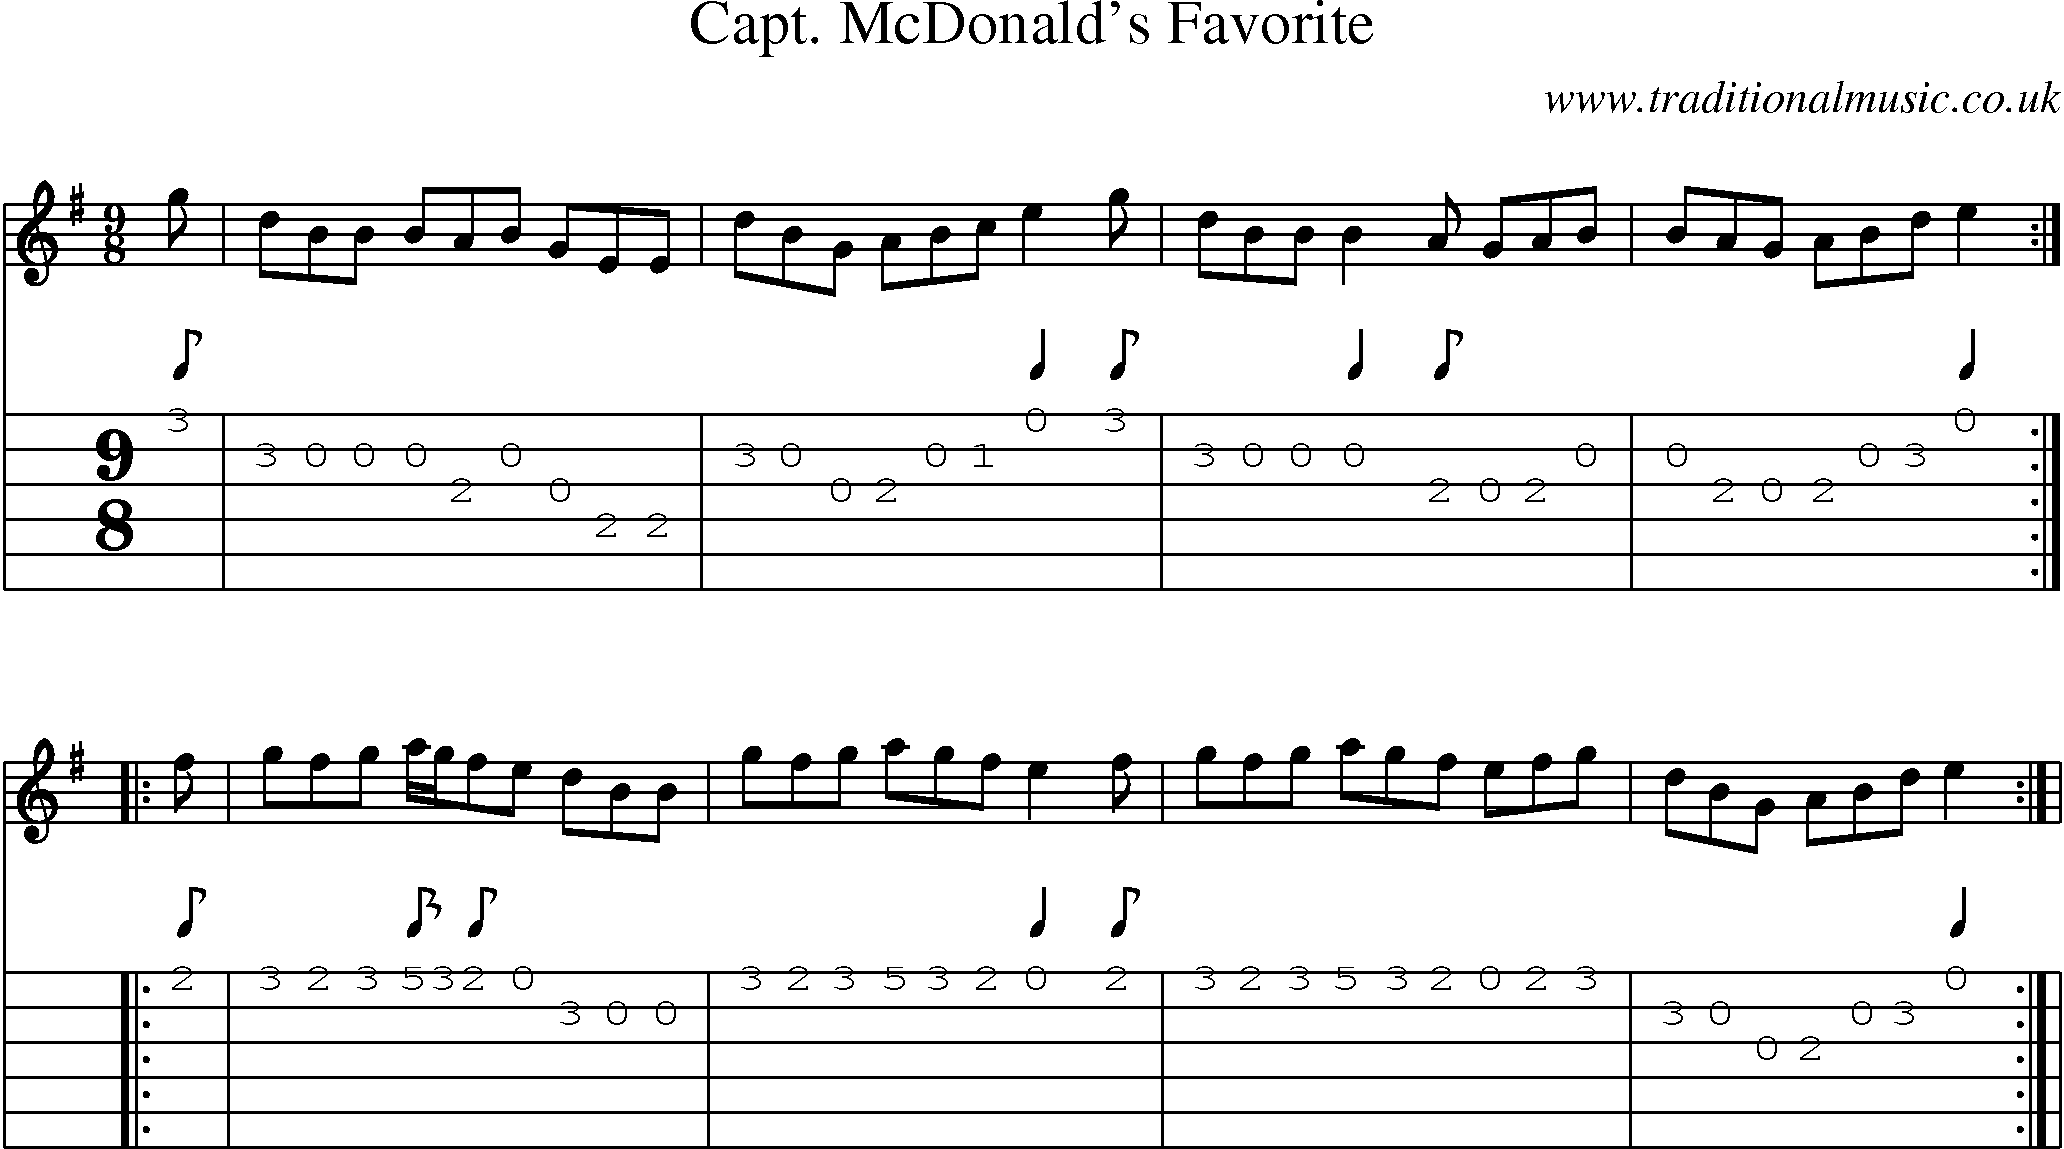 Music Score and Guitar Tabs for Capt Mcdonalds Favorite